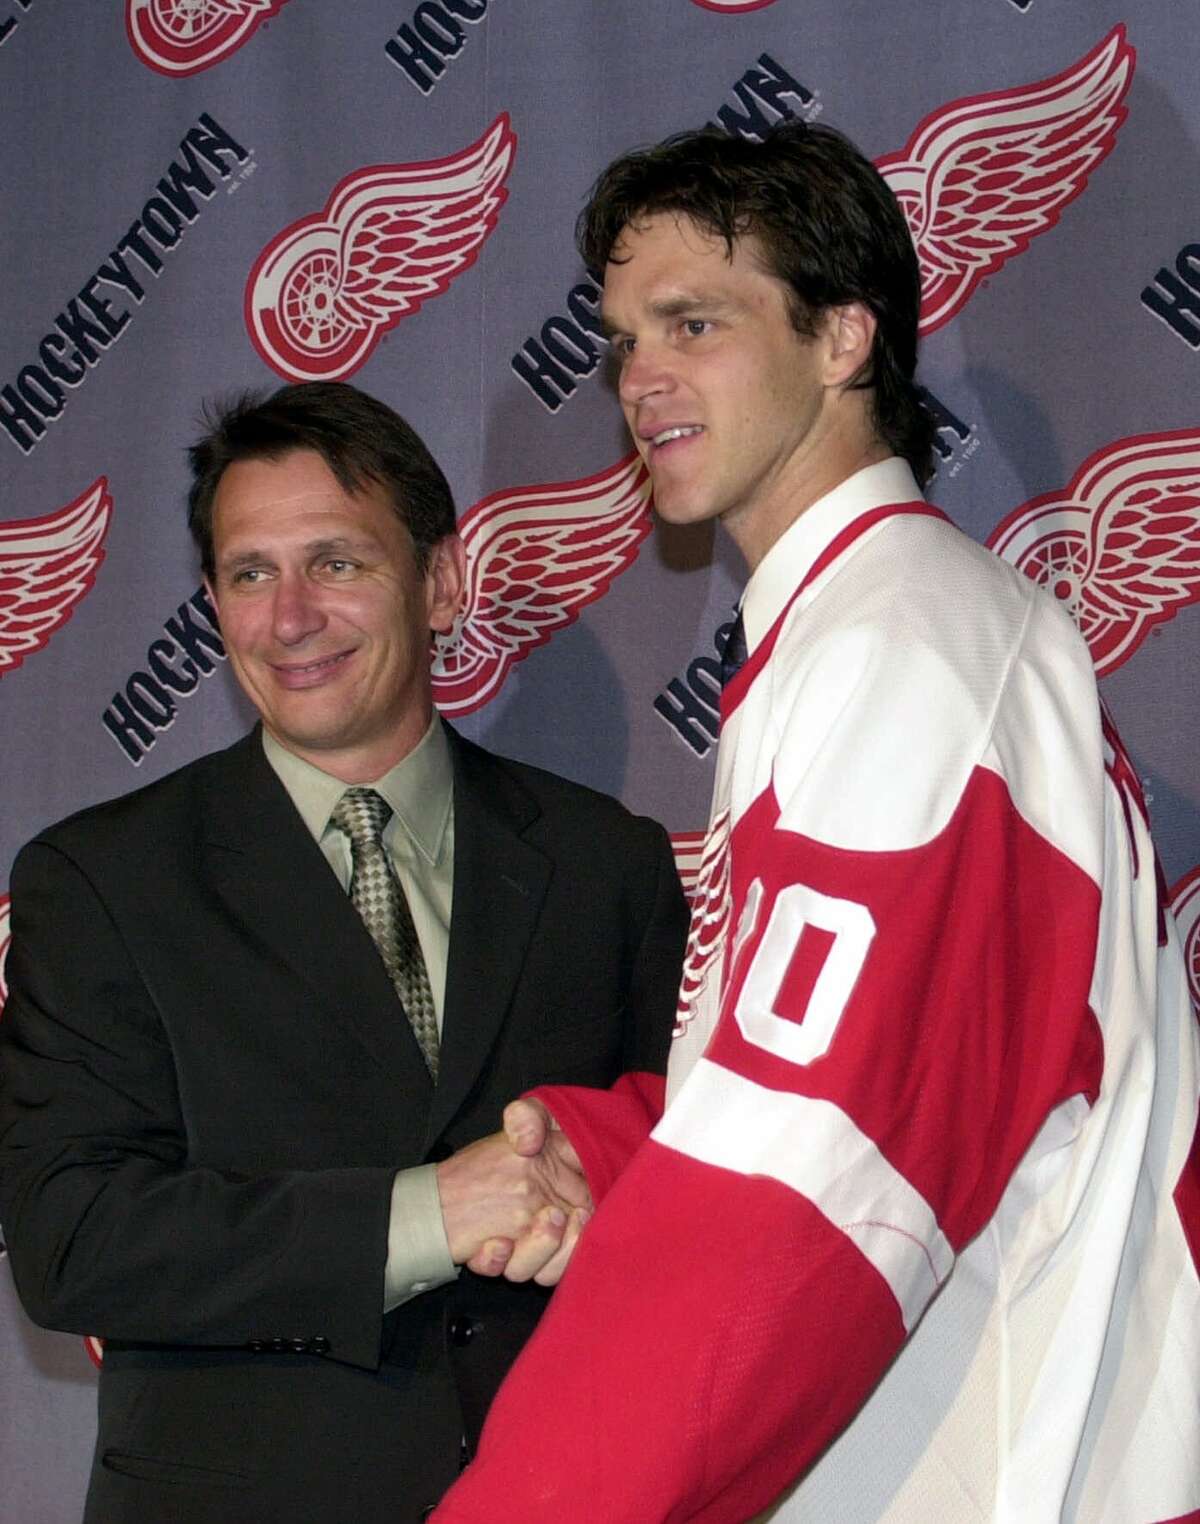 The Detroit Red Wings' newest acquisition, Luc Robitaille, right, shakes hands with general manager Ken Holland during a news conference in Detroit, Thursday, July 5, 2001. Robitaille, a 35-year-old left wing, on Monday agreed to terms with the Red Wings on a two-year contract. He spurned Los Angeles' offer of one year at a reduced salary to stay with the Kings.